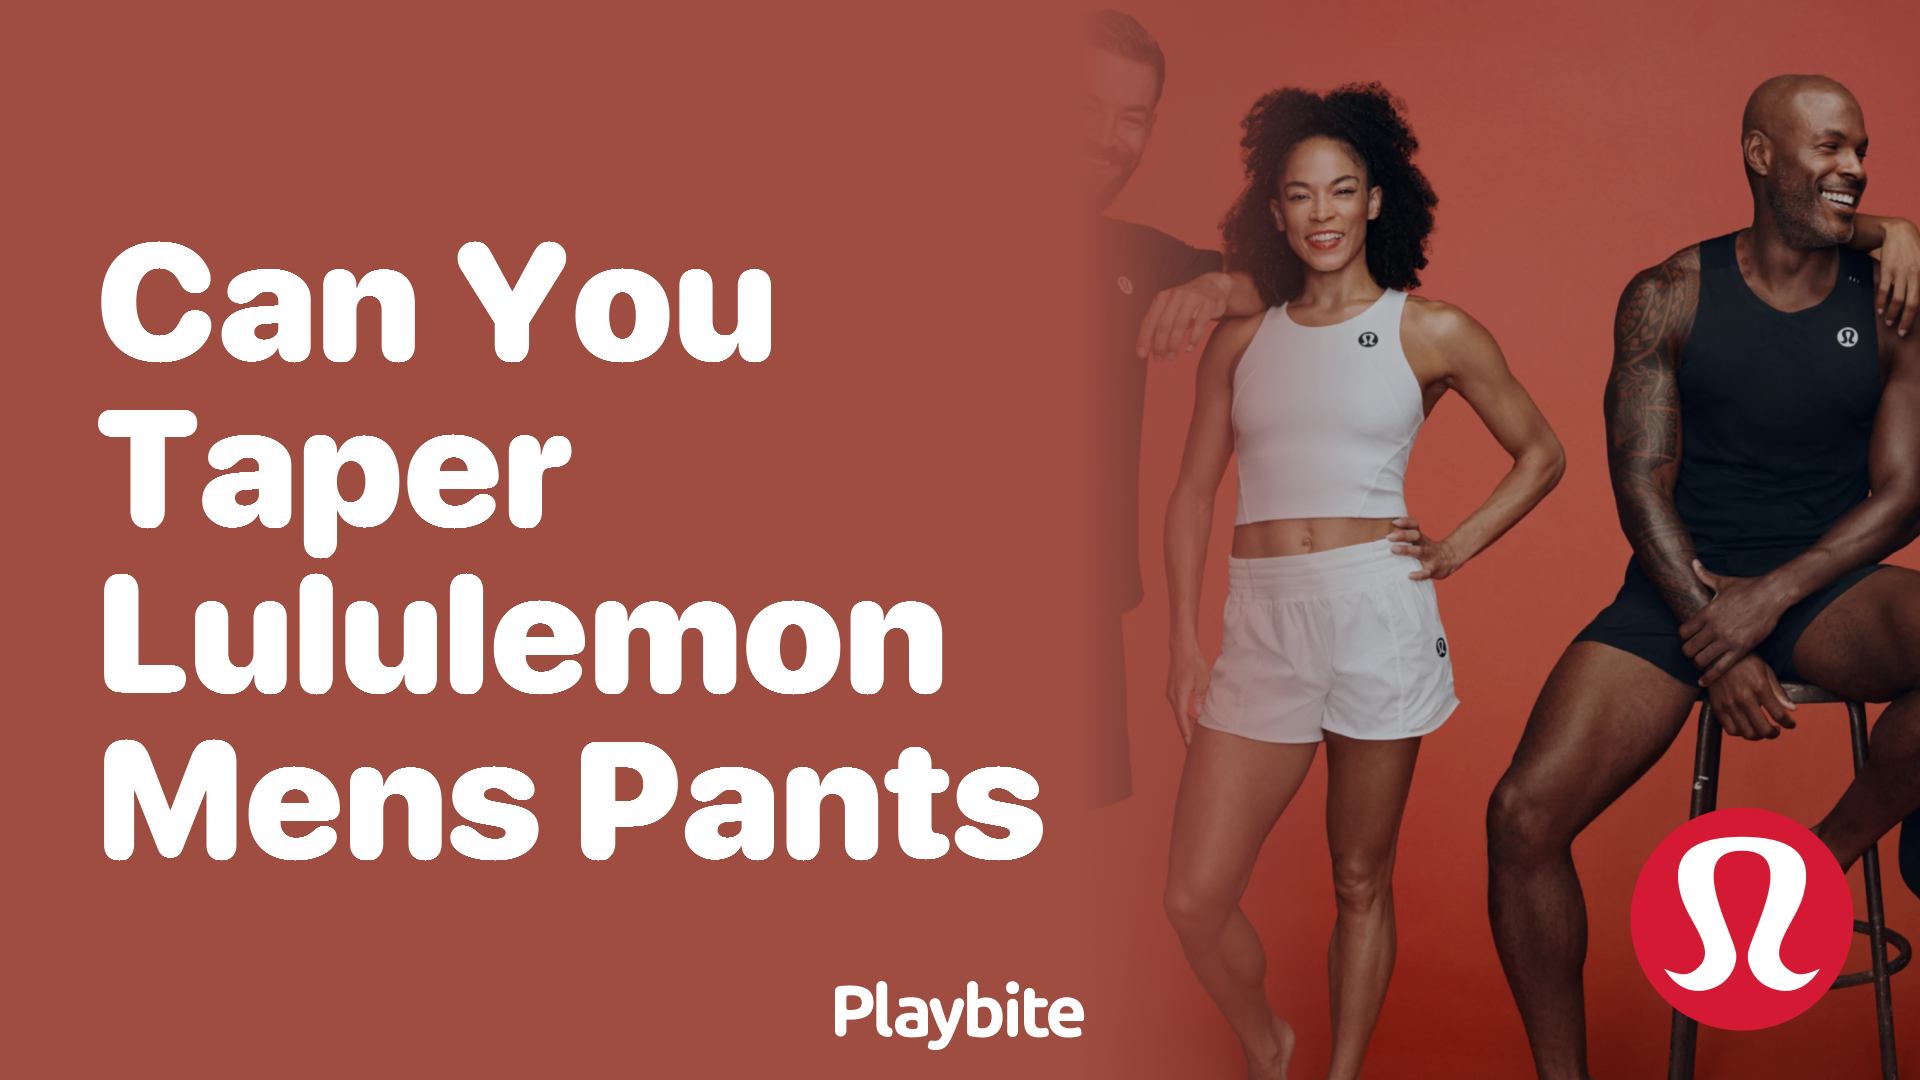 How to Find Your Size on Lululemon Clothing - Playbite